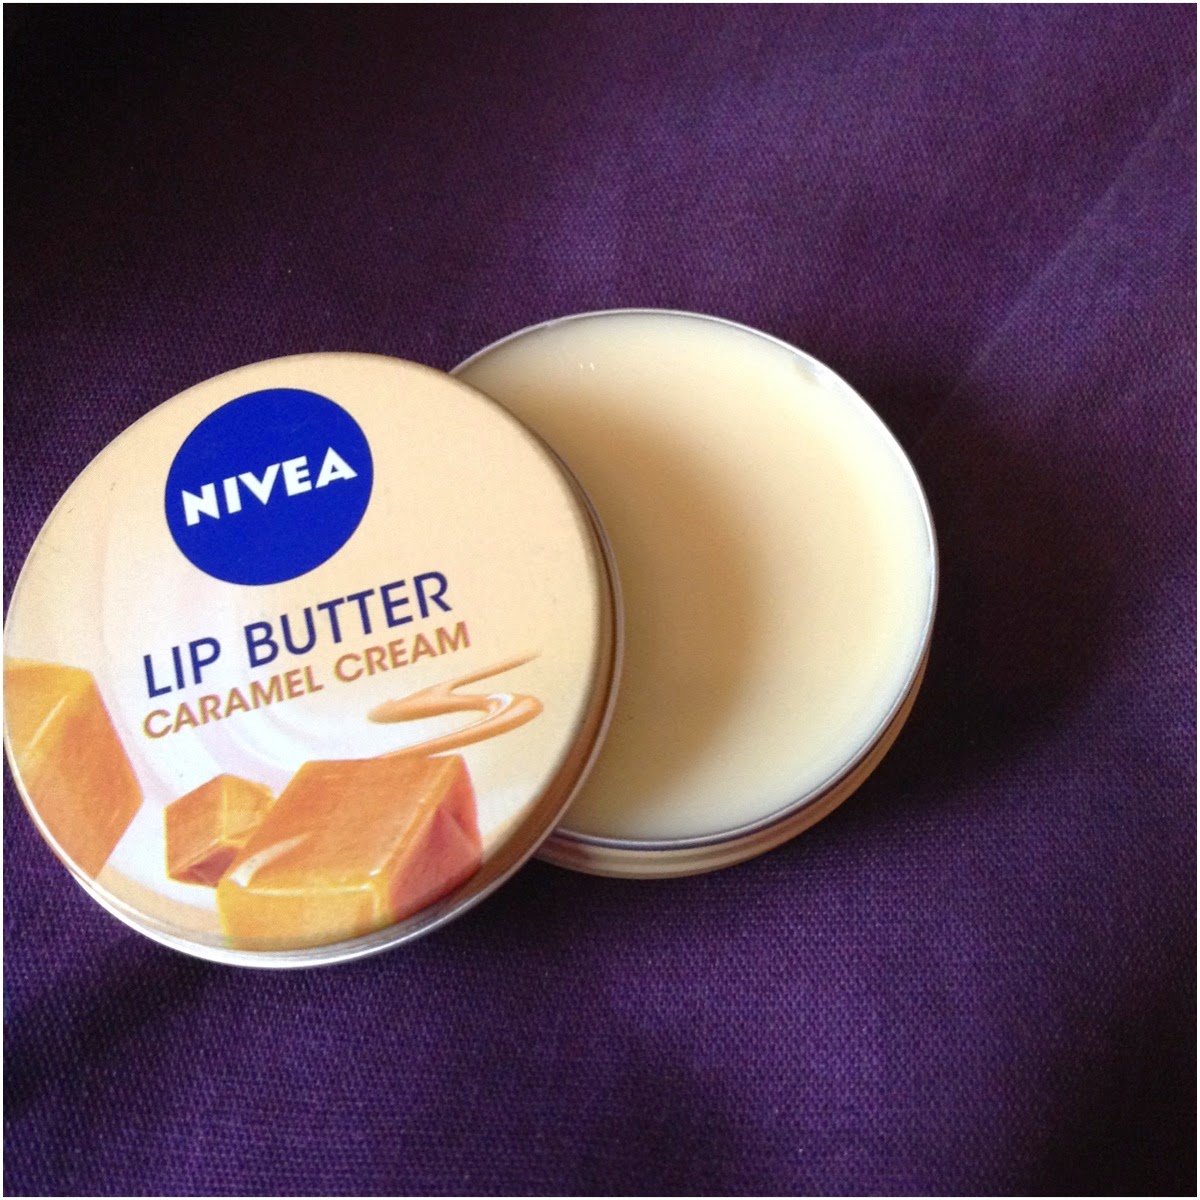 Nivea | Lip Butter | Review & My Thoughts - Dees Beautiful Life...